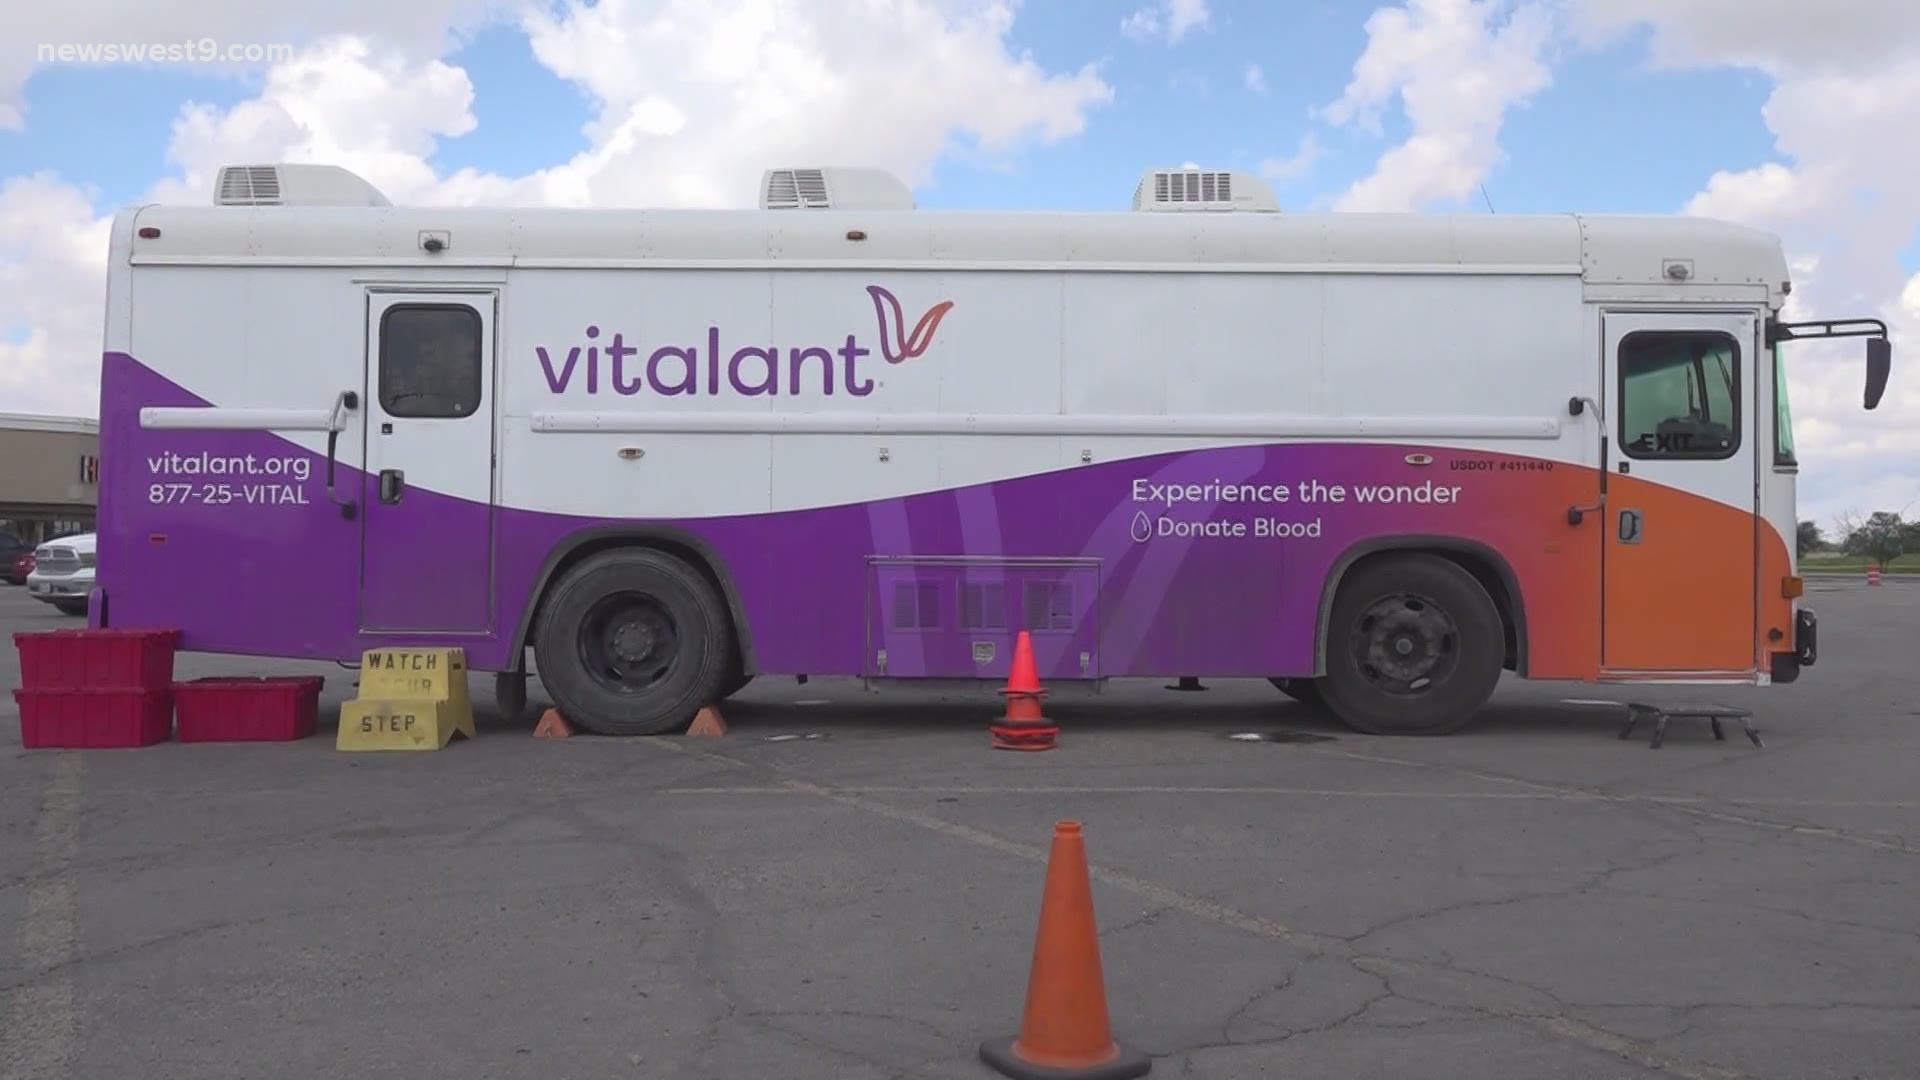 Vitalant said that with the 42 counties it serves, the hospitals need around 800 pints of blood per day, but are only getting around 200 pints.